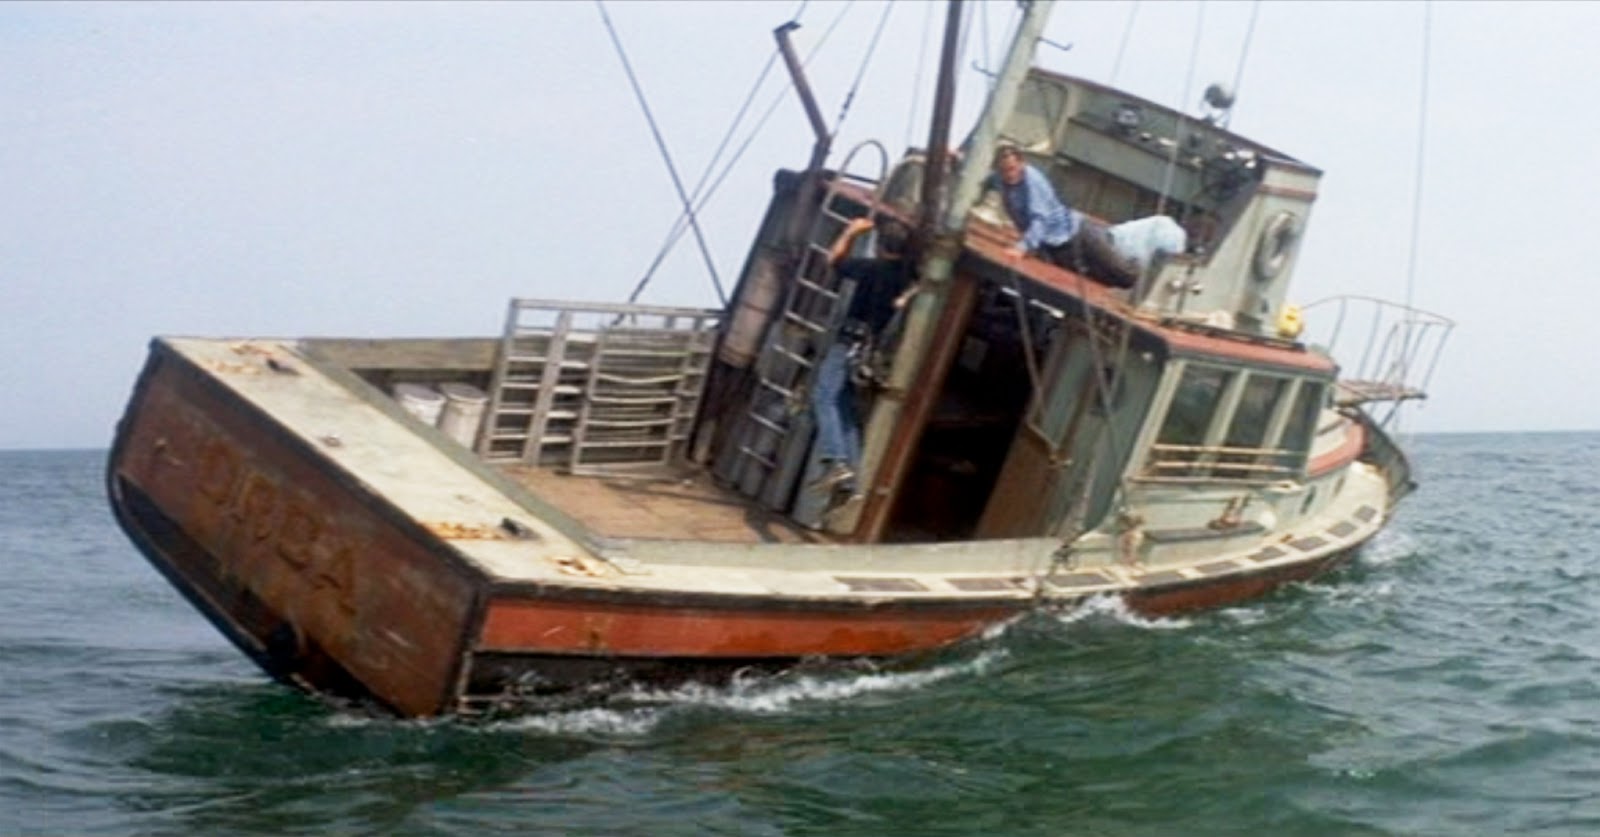 36 Facts About The Movie ‘Jaws’ That Producers Kept A 